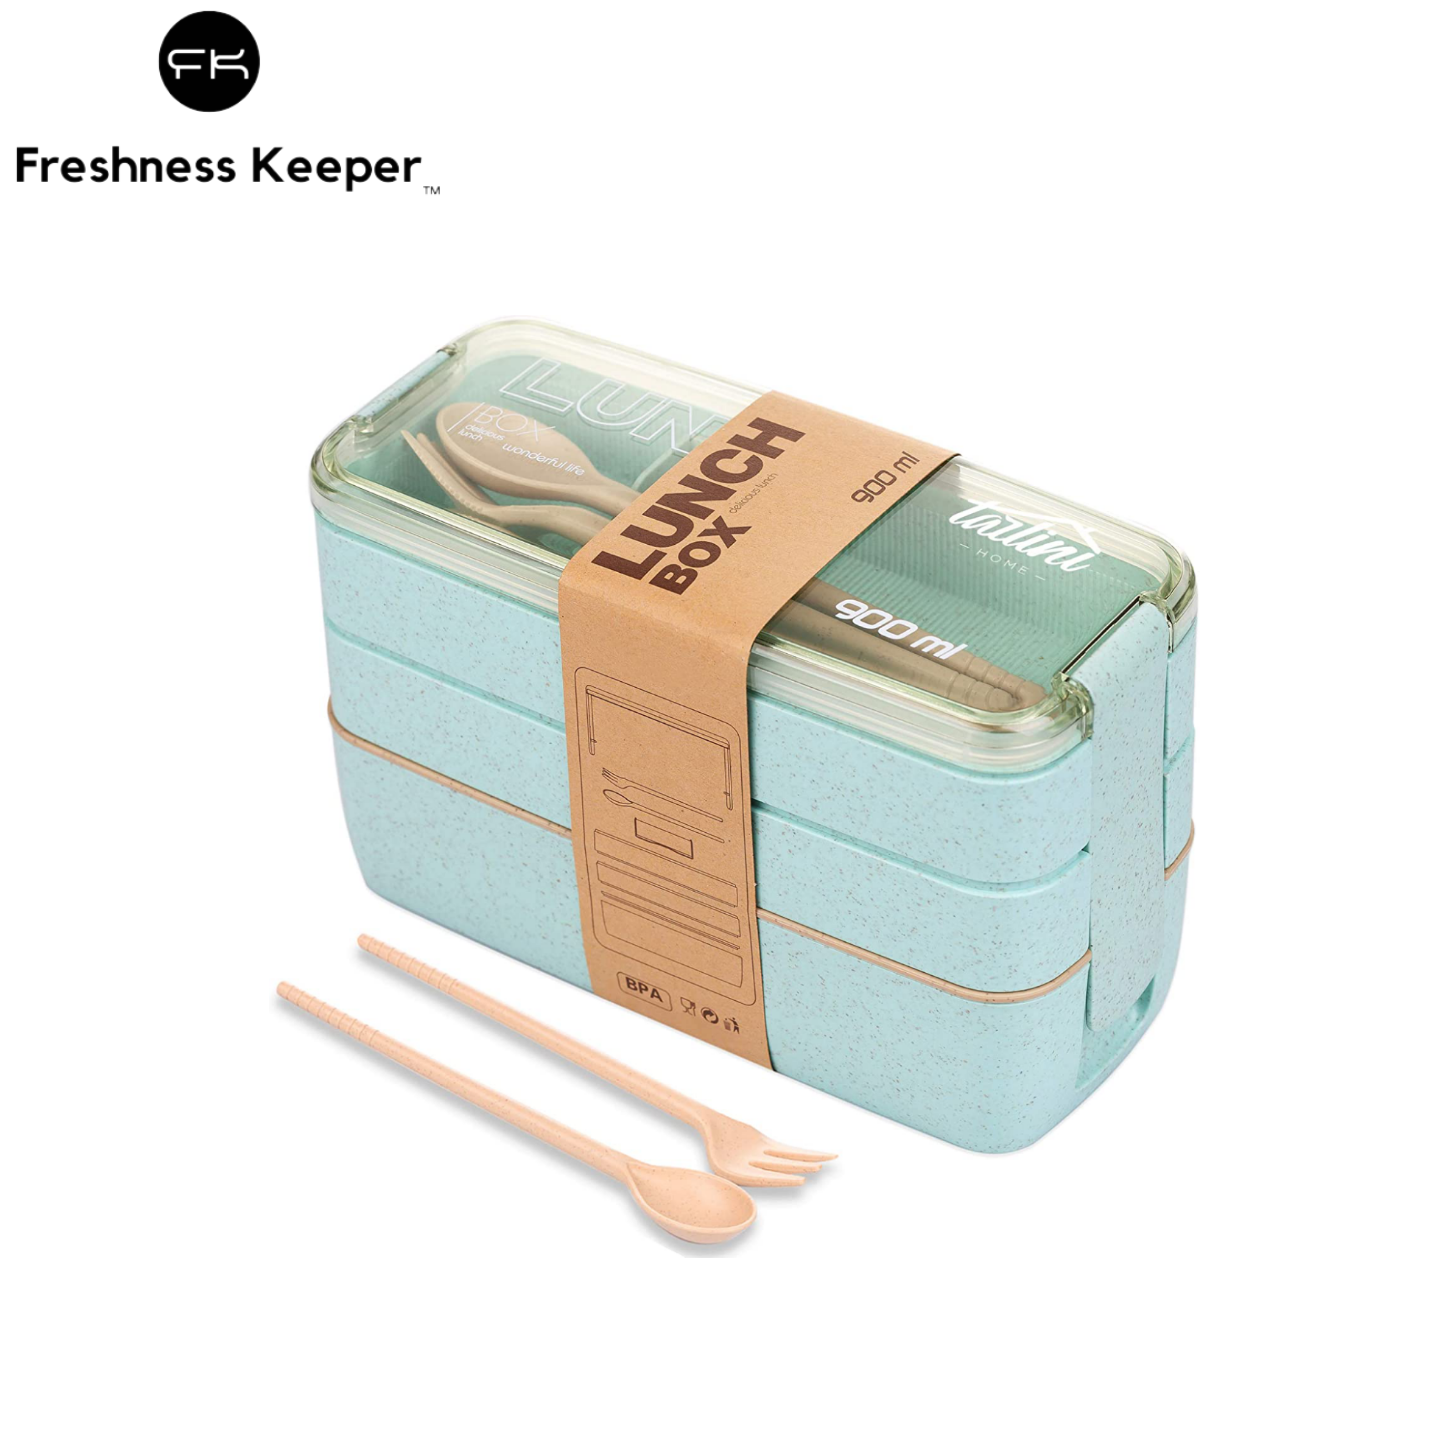 Stackable 3-In-1 Compartment Wheat Straw Bento Lunch Box